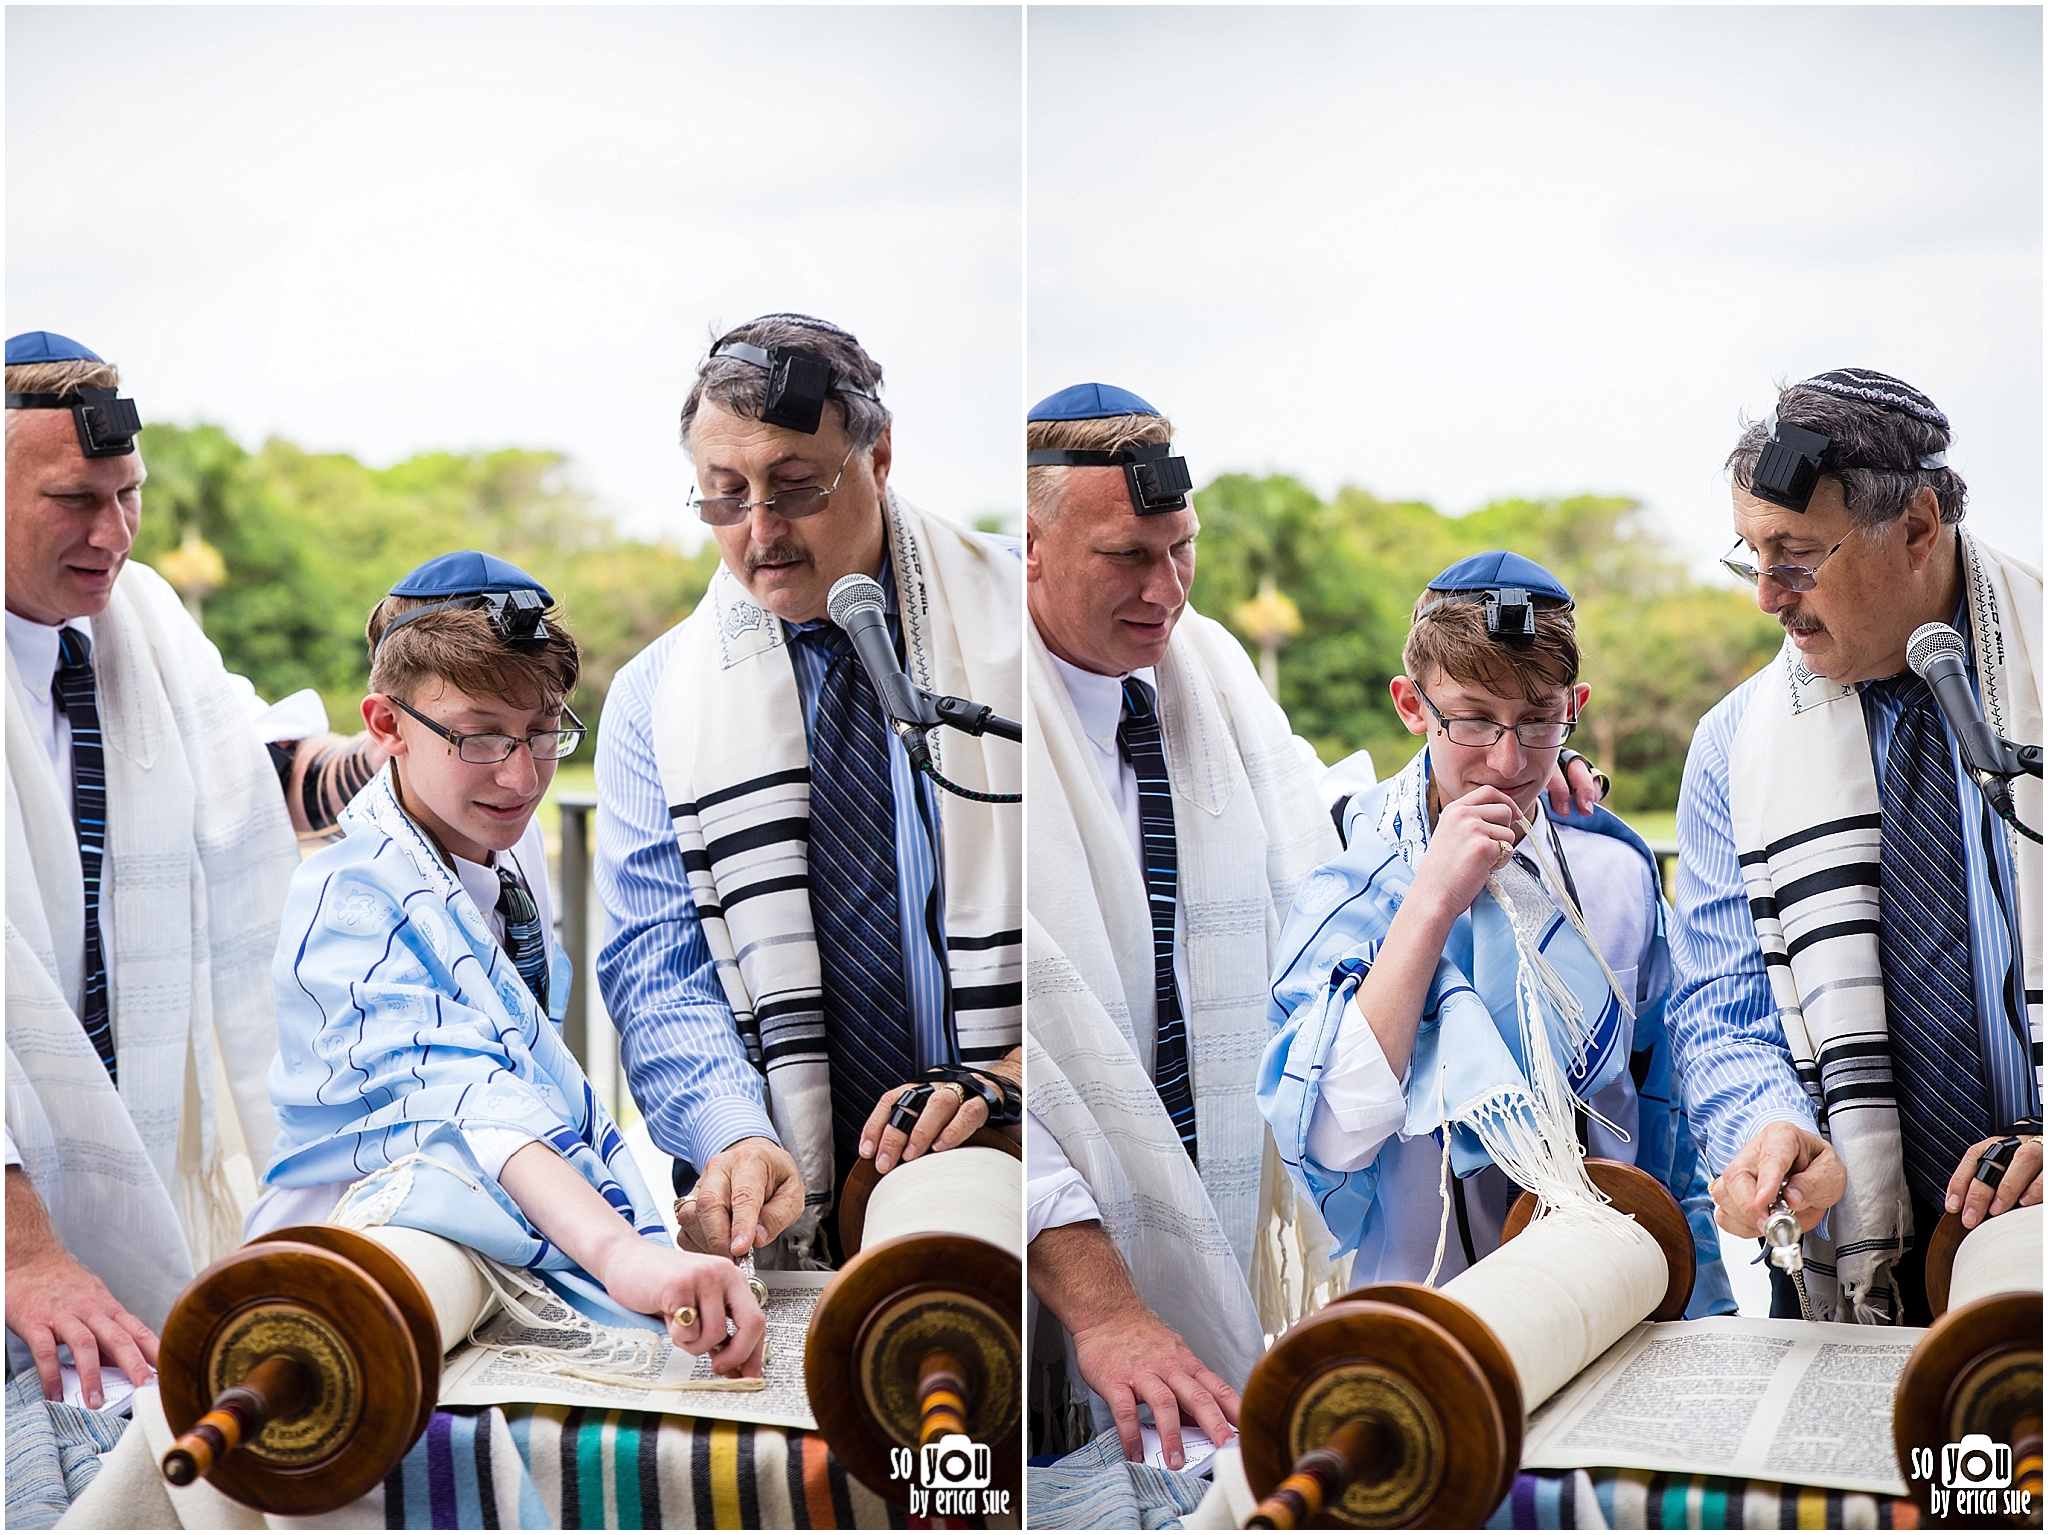 bar-mitzvah-photography-ft-lauderdale-so-you-by-erica-sue-0469 (2).jpg